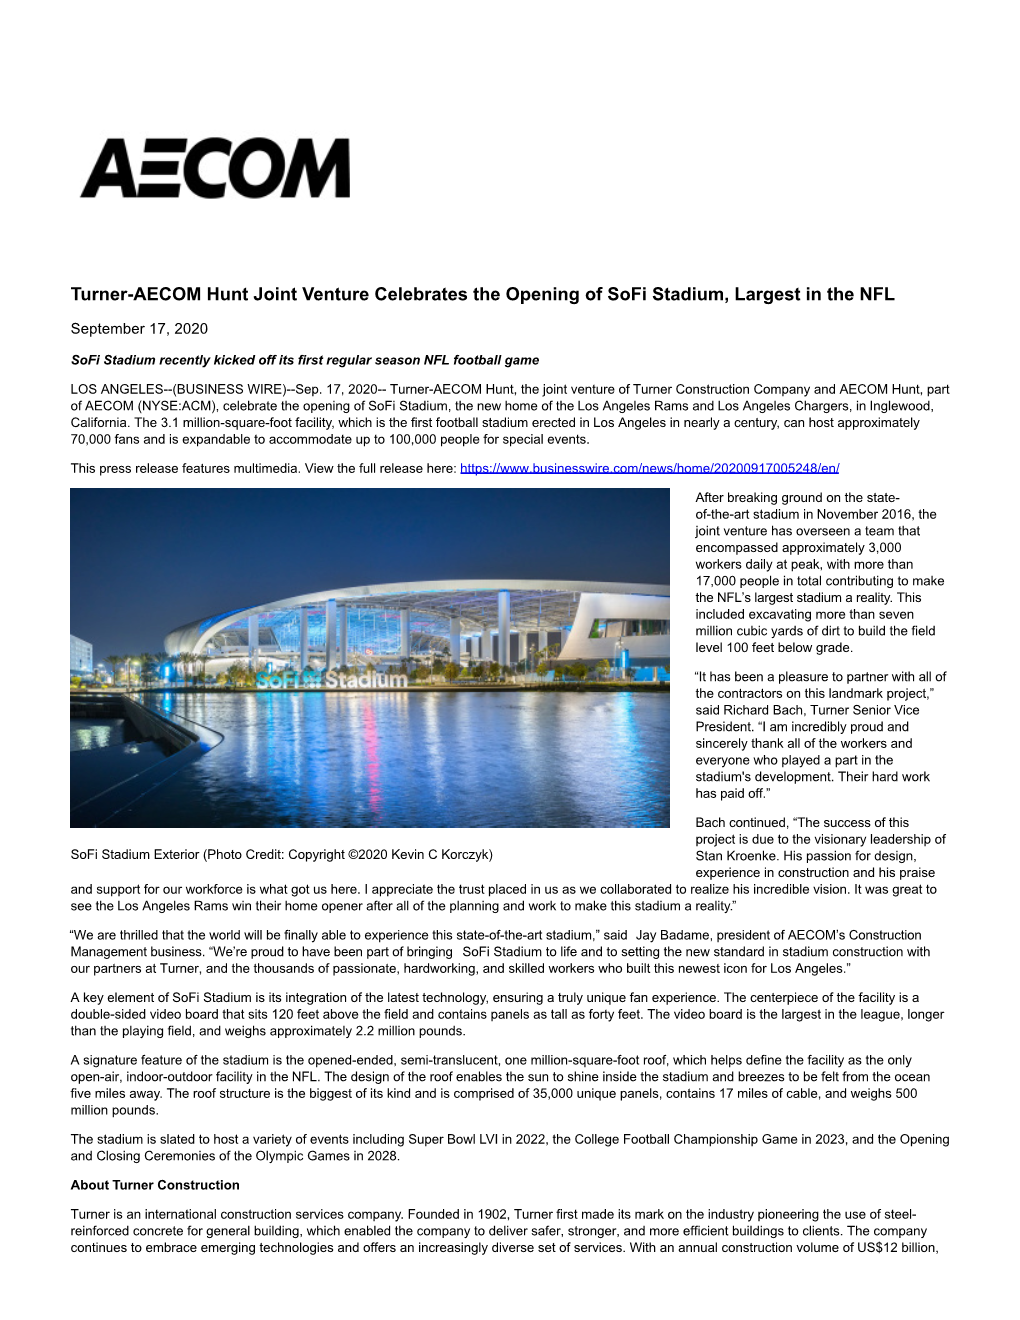 Turner-AECOM Hunt Joint Venture Celebrates the Opening of Sofi Stadium, Largest in the NFL